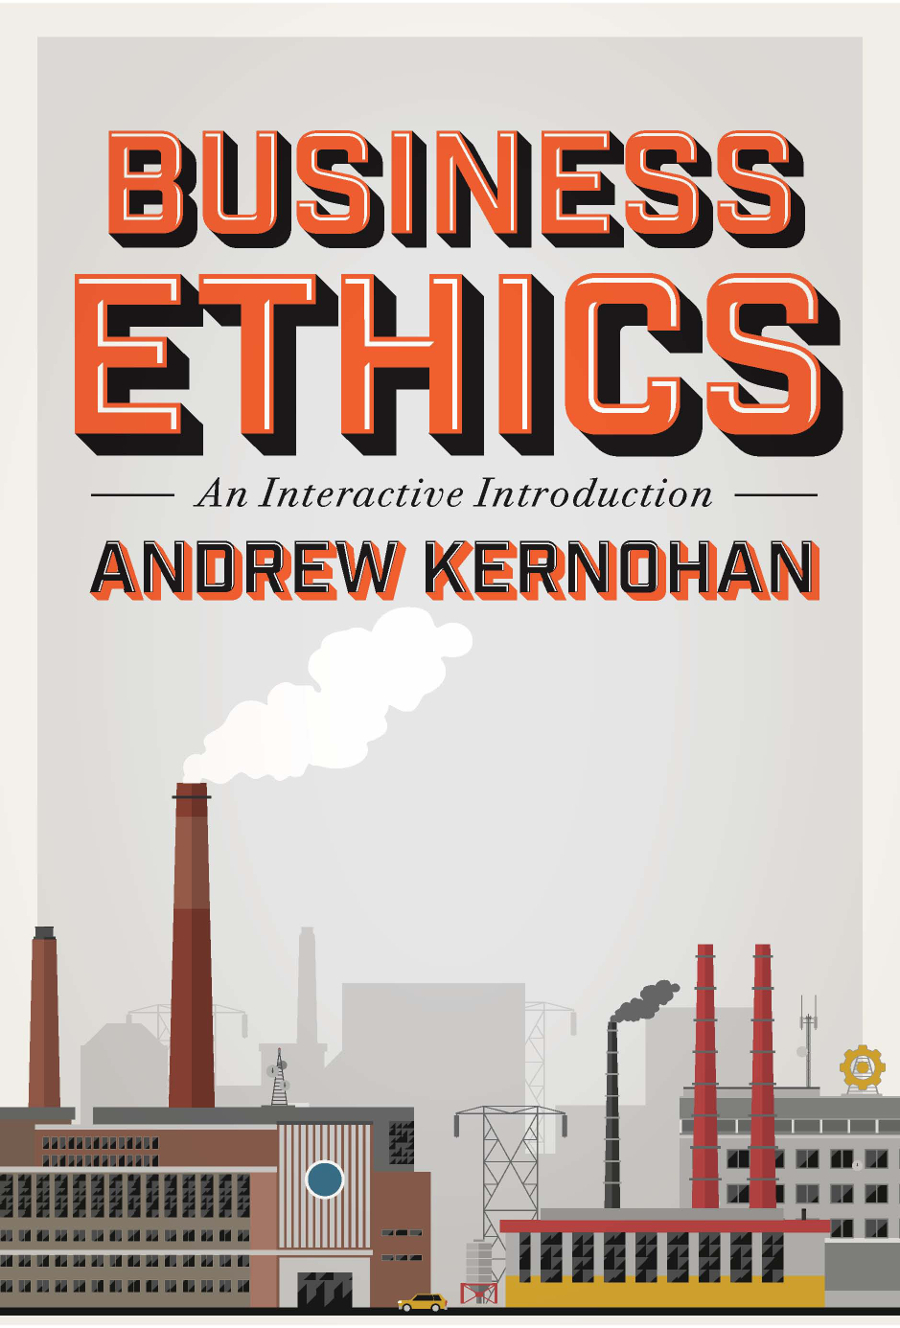 Free case study on business ethics